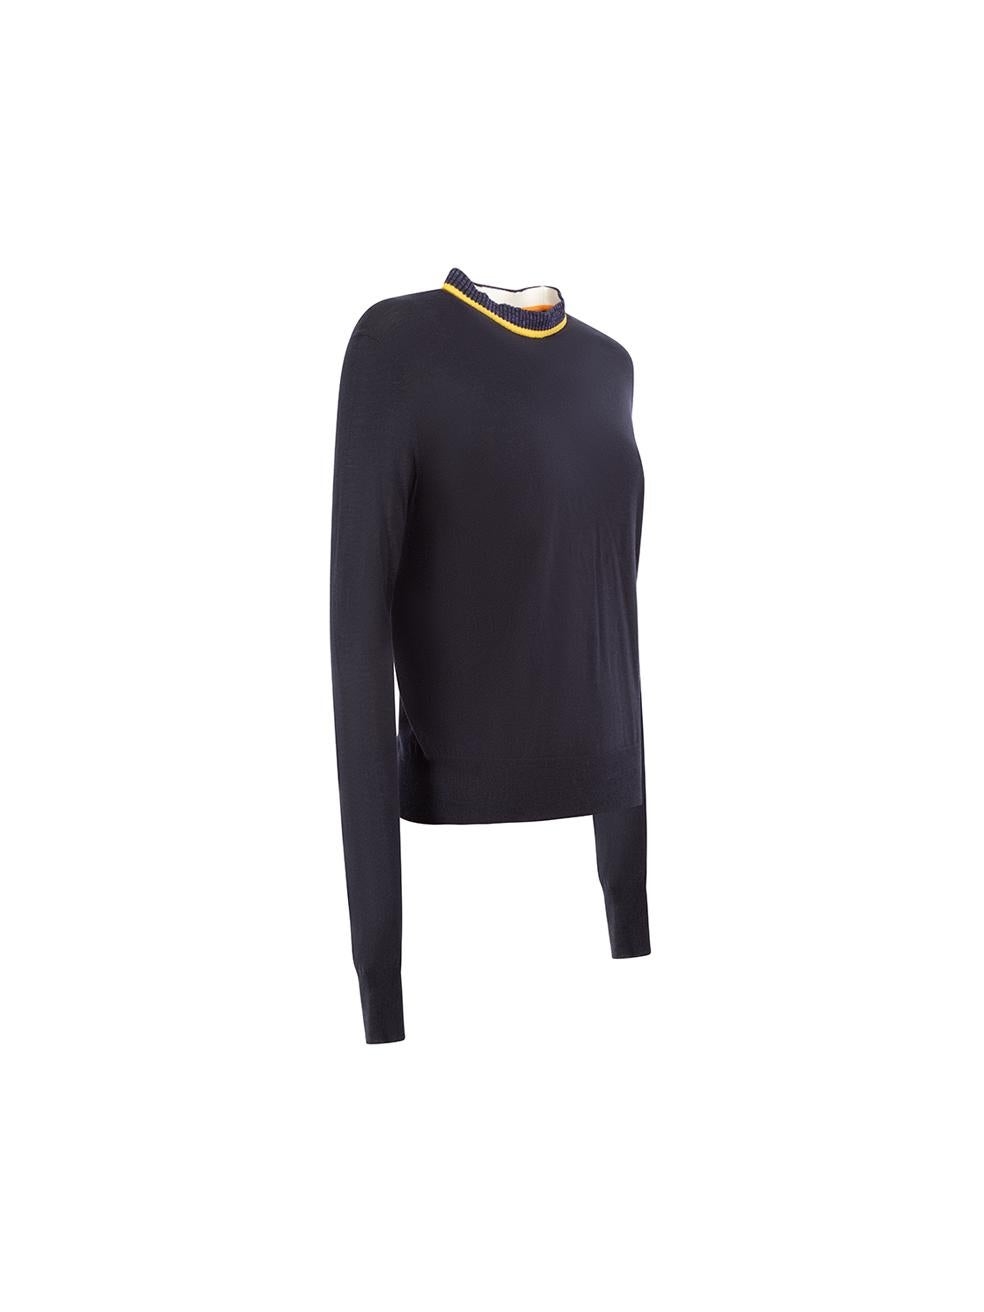 CONDITION is Very good. Minimal wear to jumper is evident. Minimal wear to the front and back with pulls to the knit on this used C√©line designer resale item.
  
Details
Navy
Wool
Knit jumper
Long sleeves
Round neck
Striped neck detail

Made in